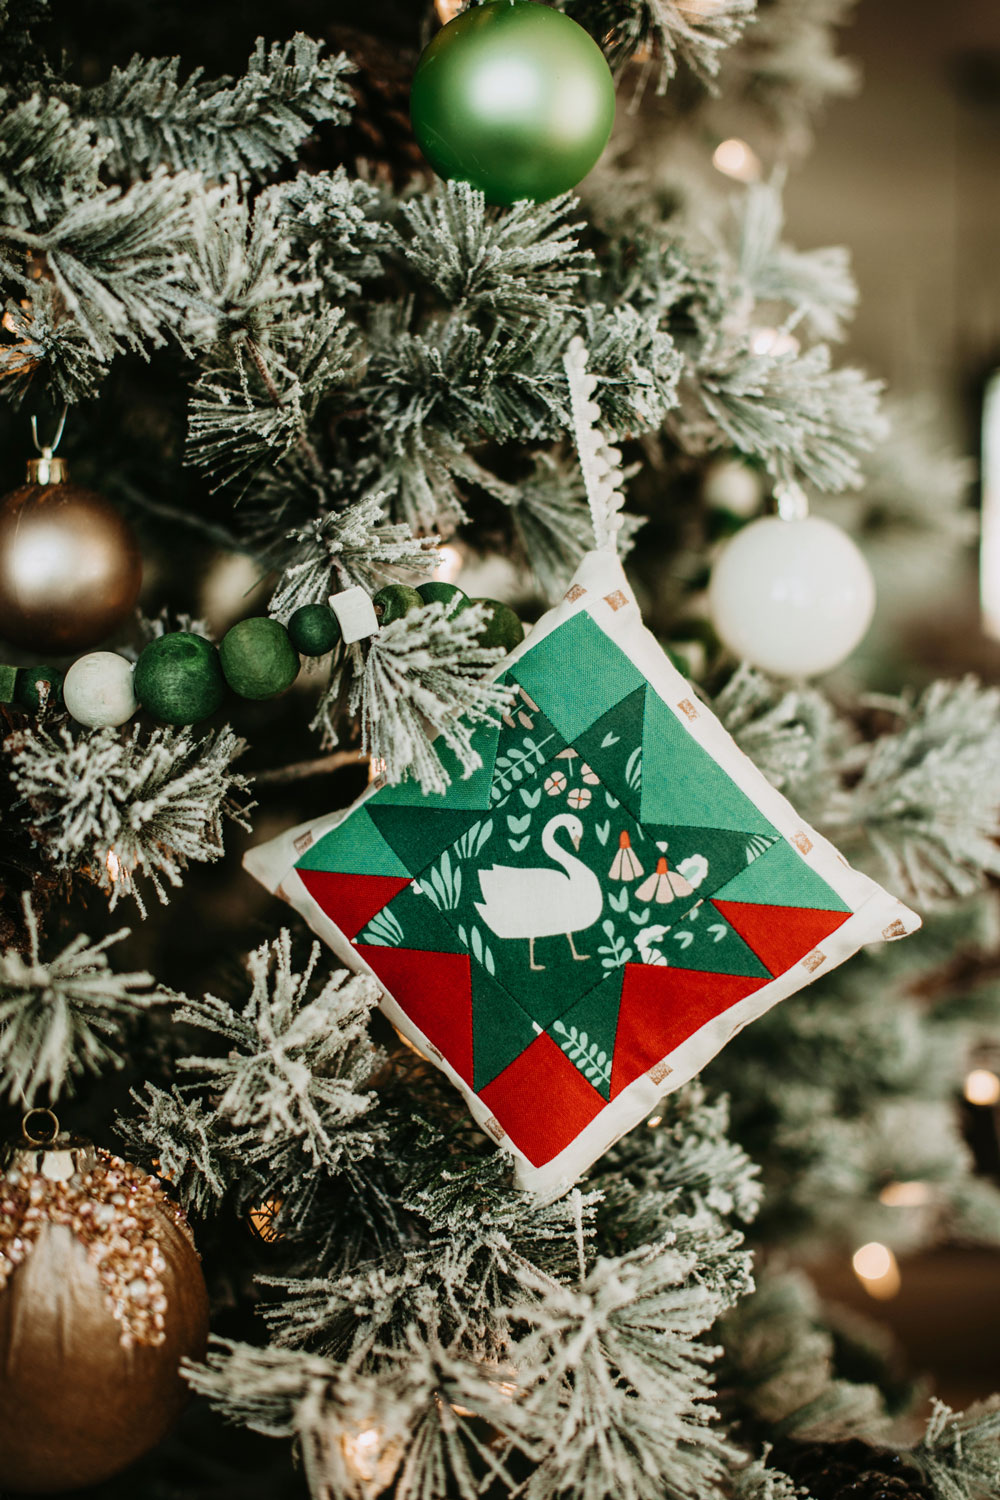 This Christmas Tree Ornament Tutorial walks you through an easy DIY project based on the Stars Hollow Quilt pattern by Suzy Quilts | suzyquilts.com #ornamenttutorial #DIYornament